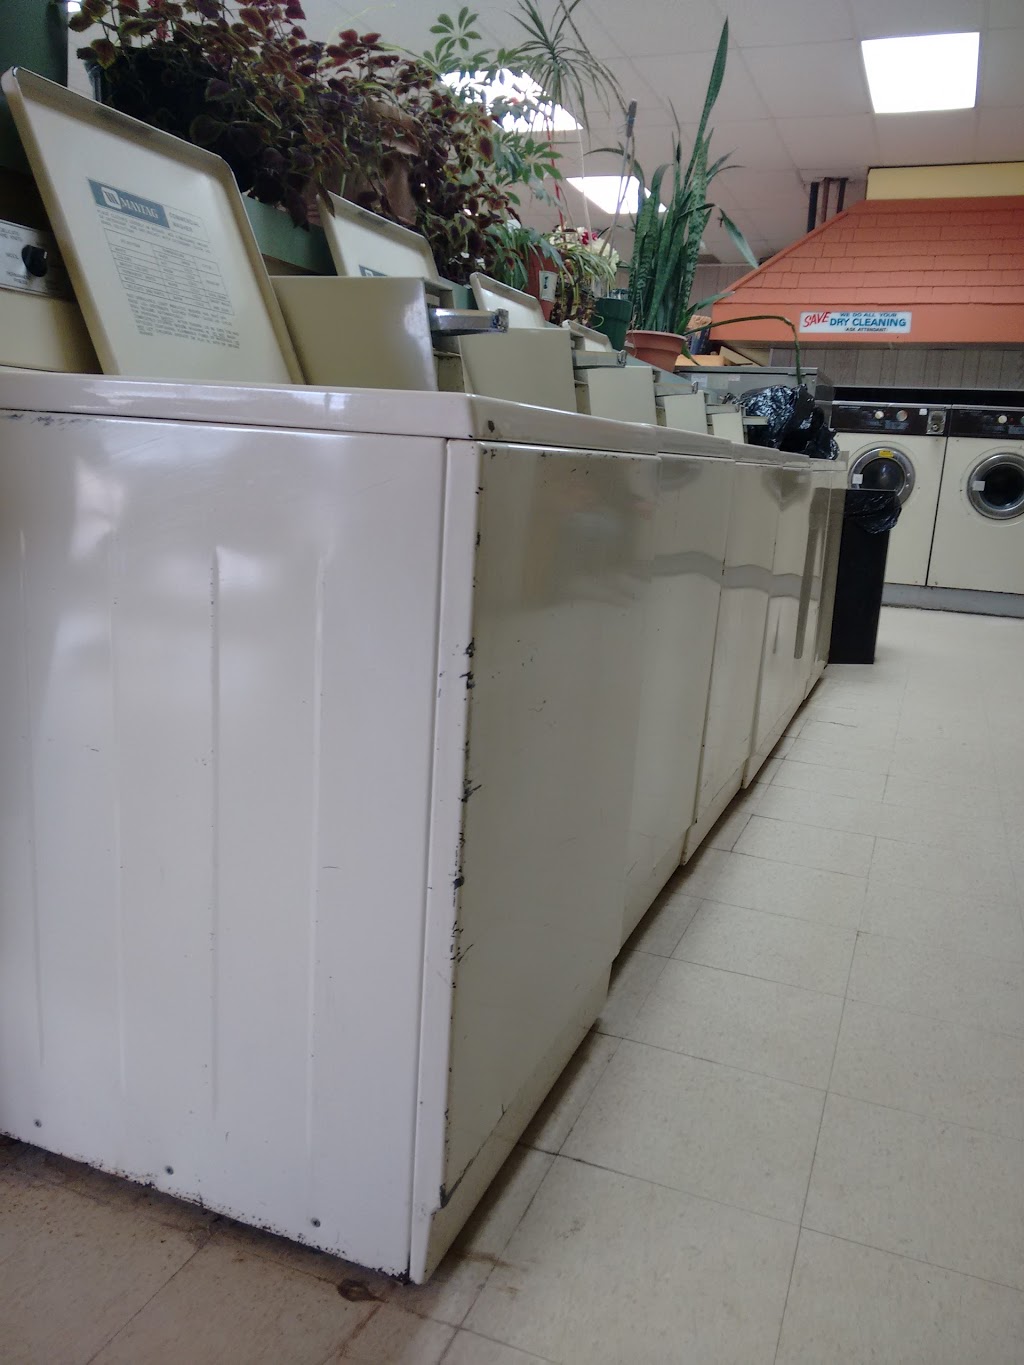 Frontenac Mall Coin Laundry | laundry | 1300 Bath Rd, Kingston, ON K7M 4X4, Canada | 6137672855 OR +1 613-767-2855